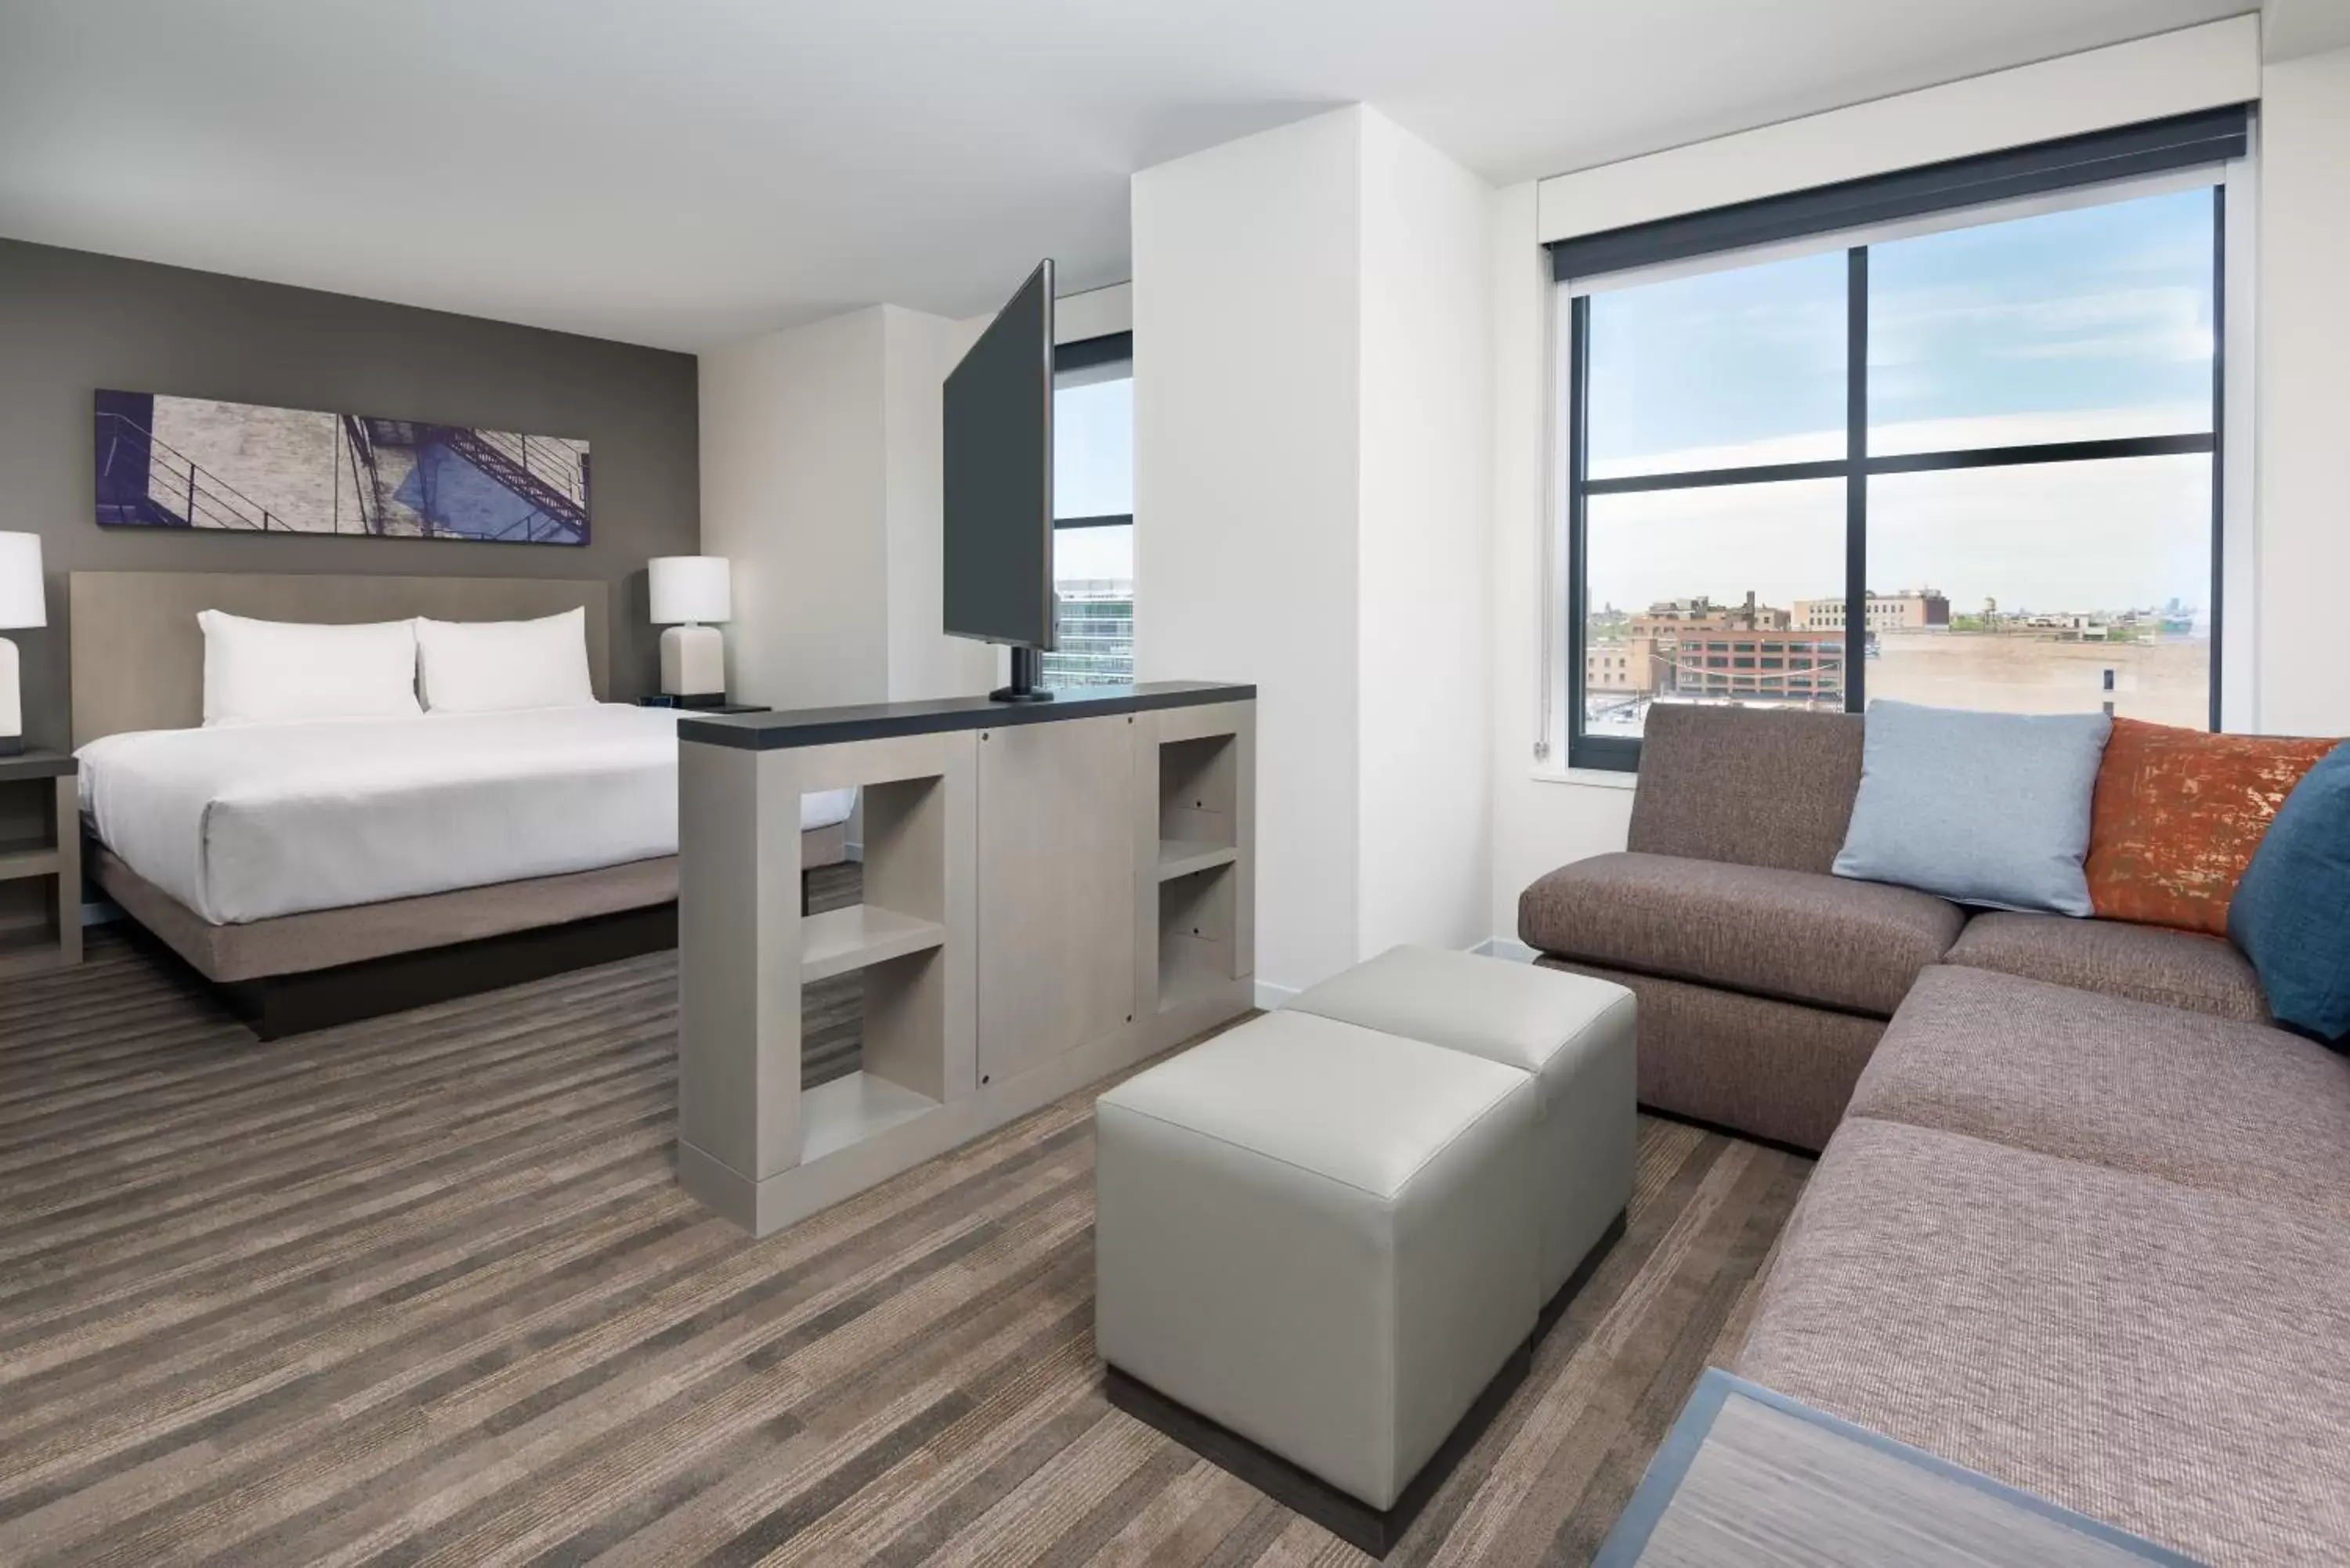 King Studio Suite with Kitchen and Sofa Bed in Hyatt House Chicago West Loop